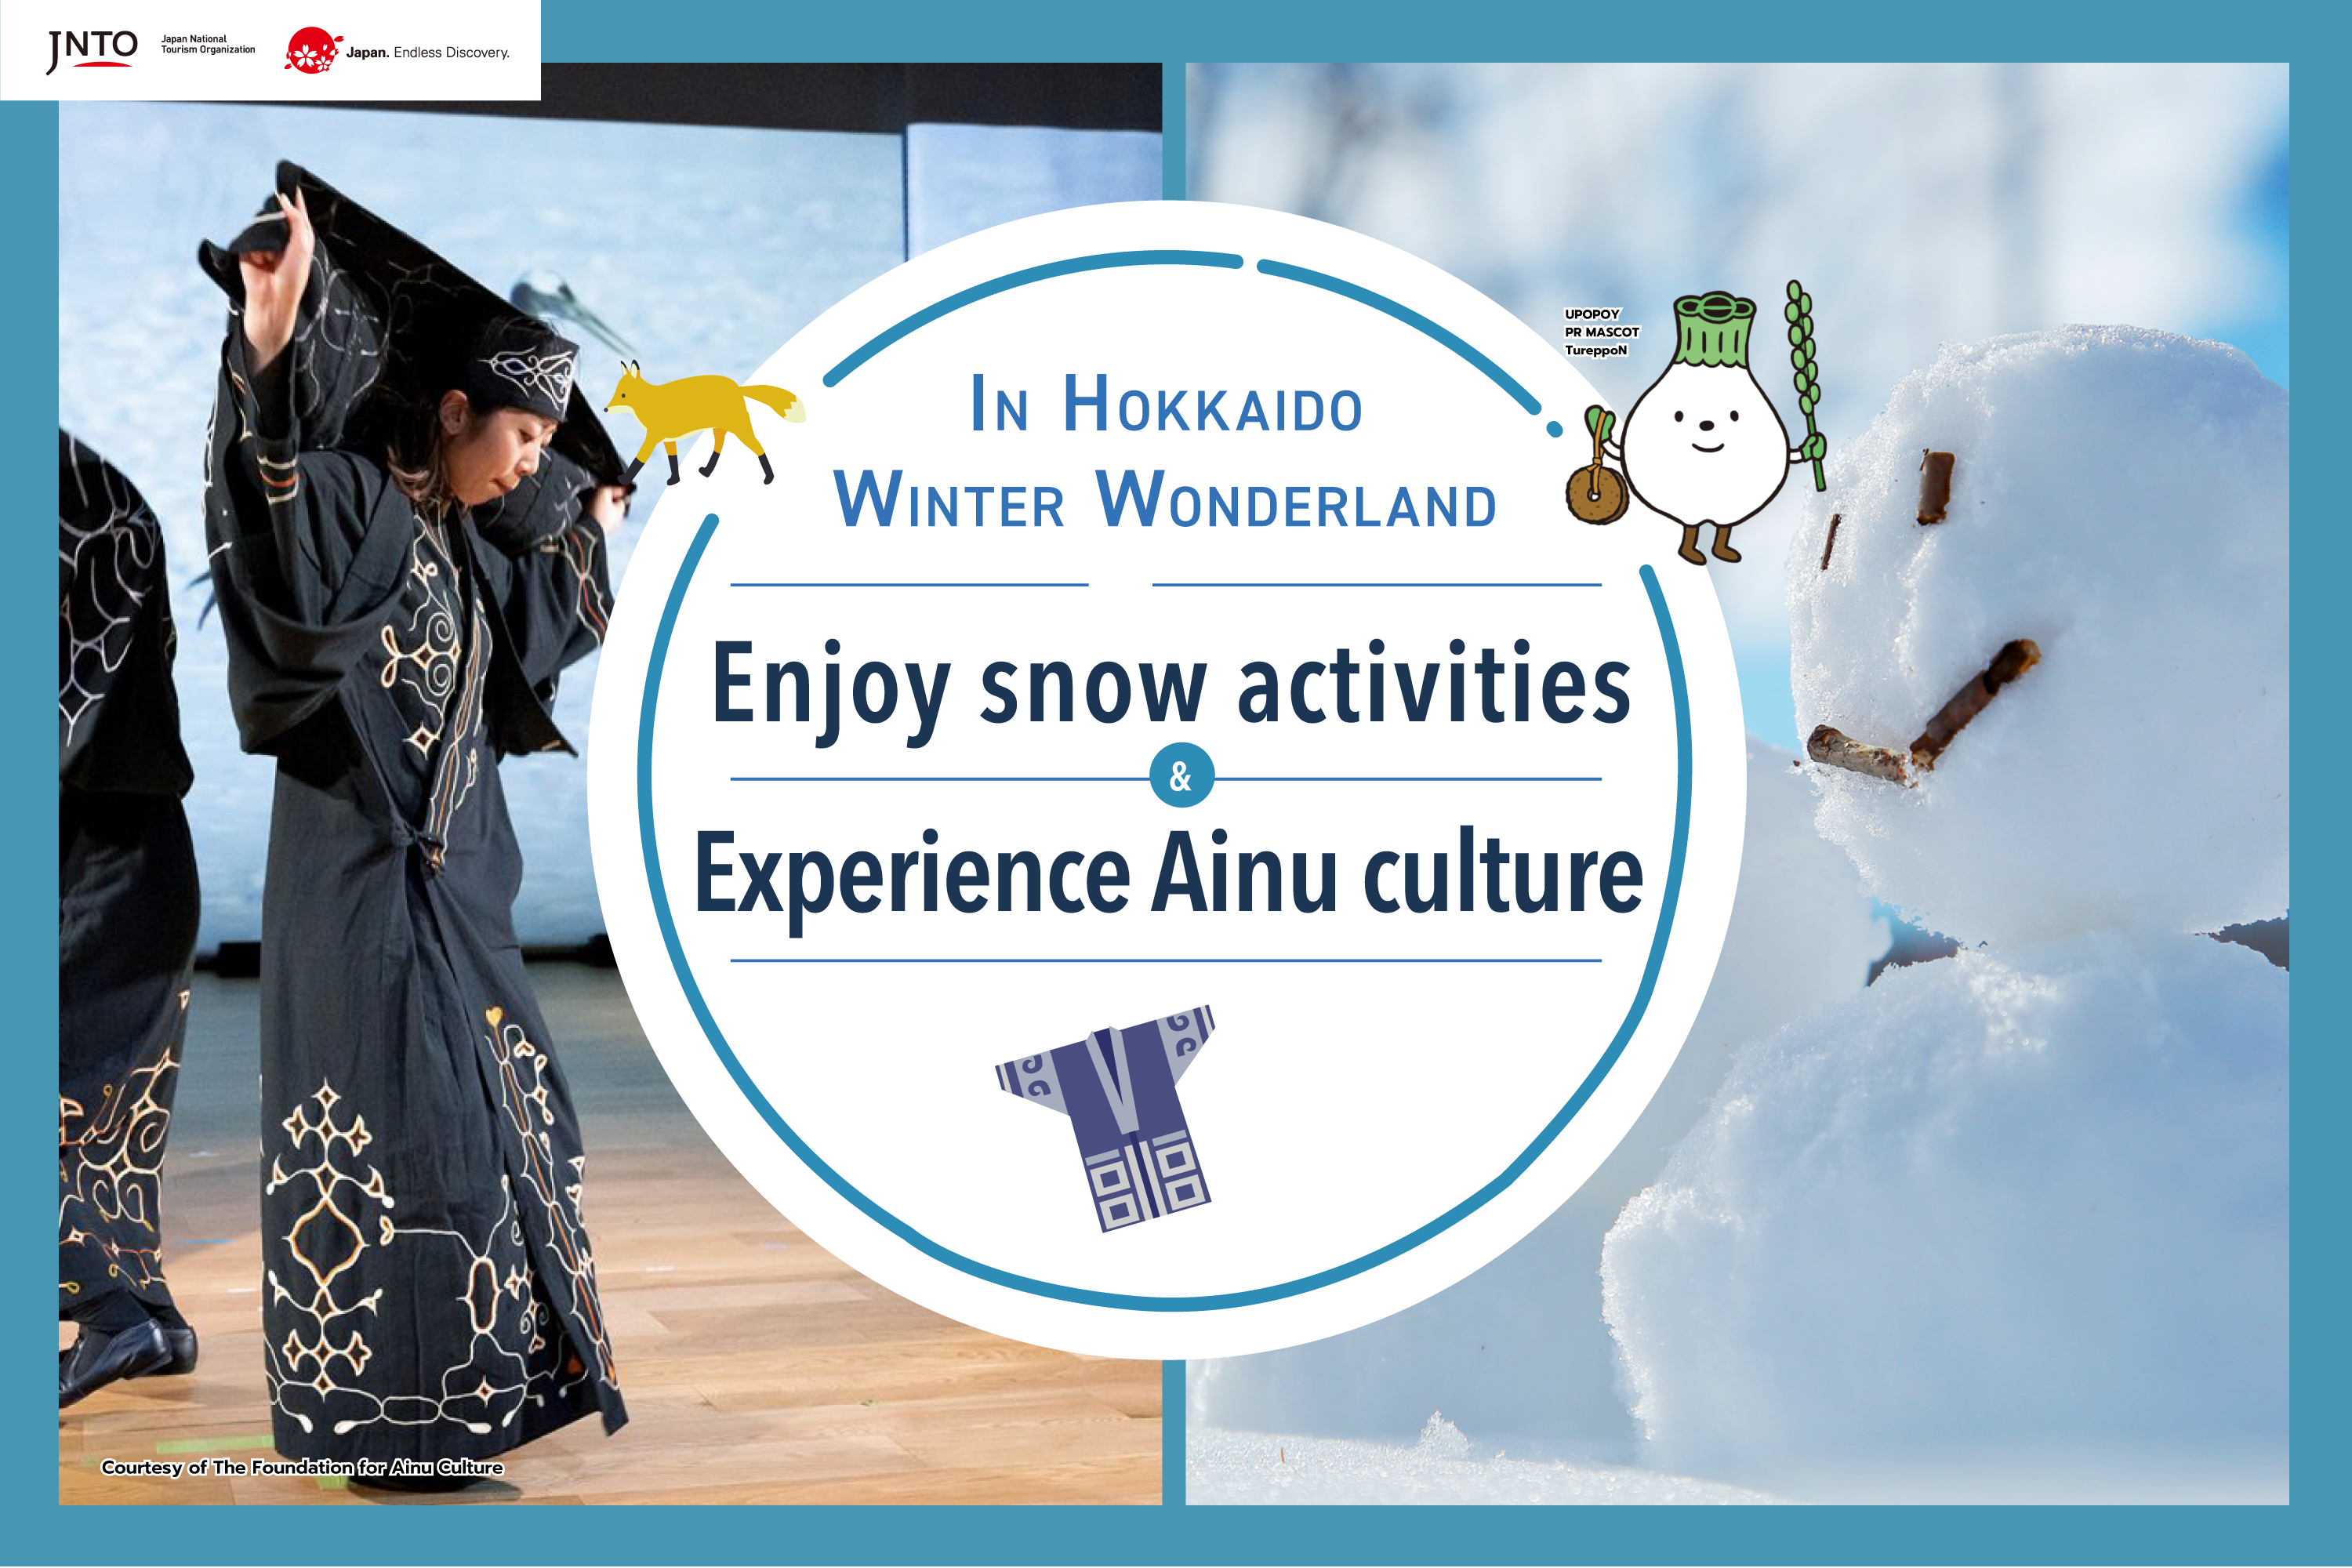 An introduction to Ainu culture and the winter activities in Hokkaido